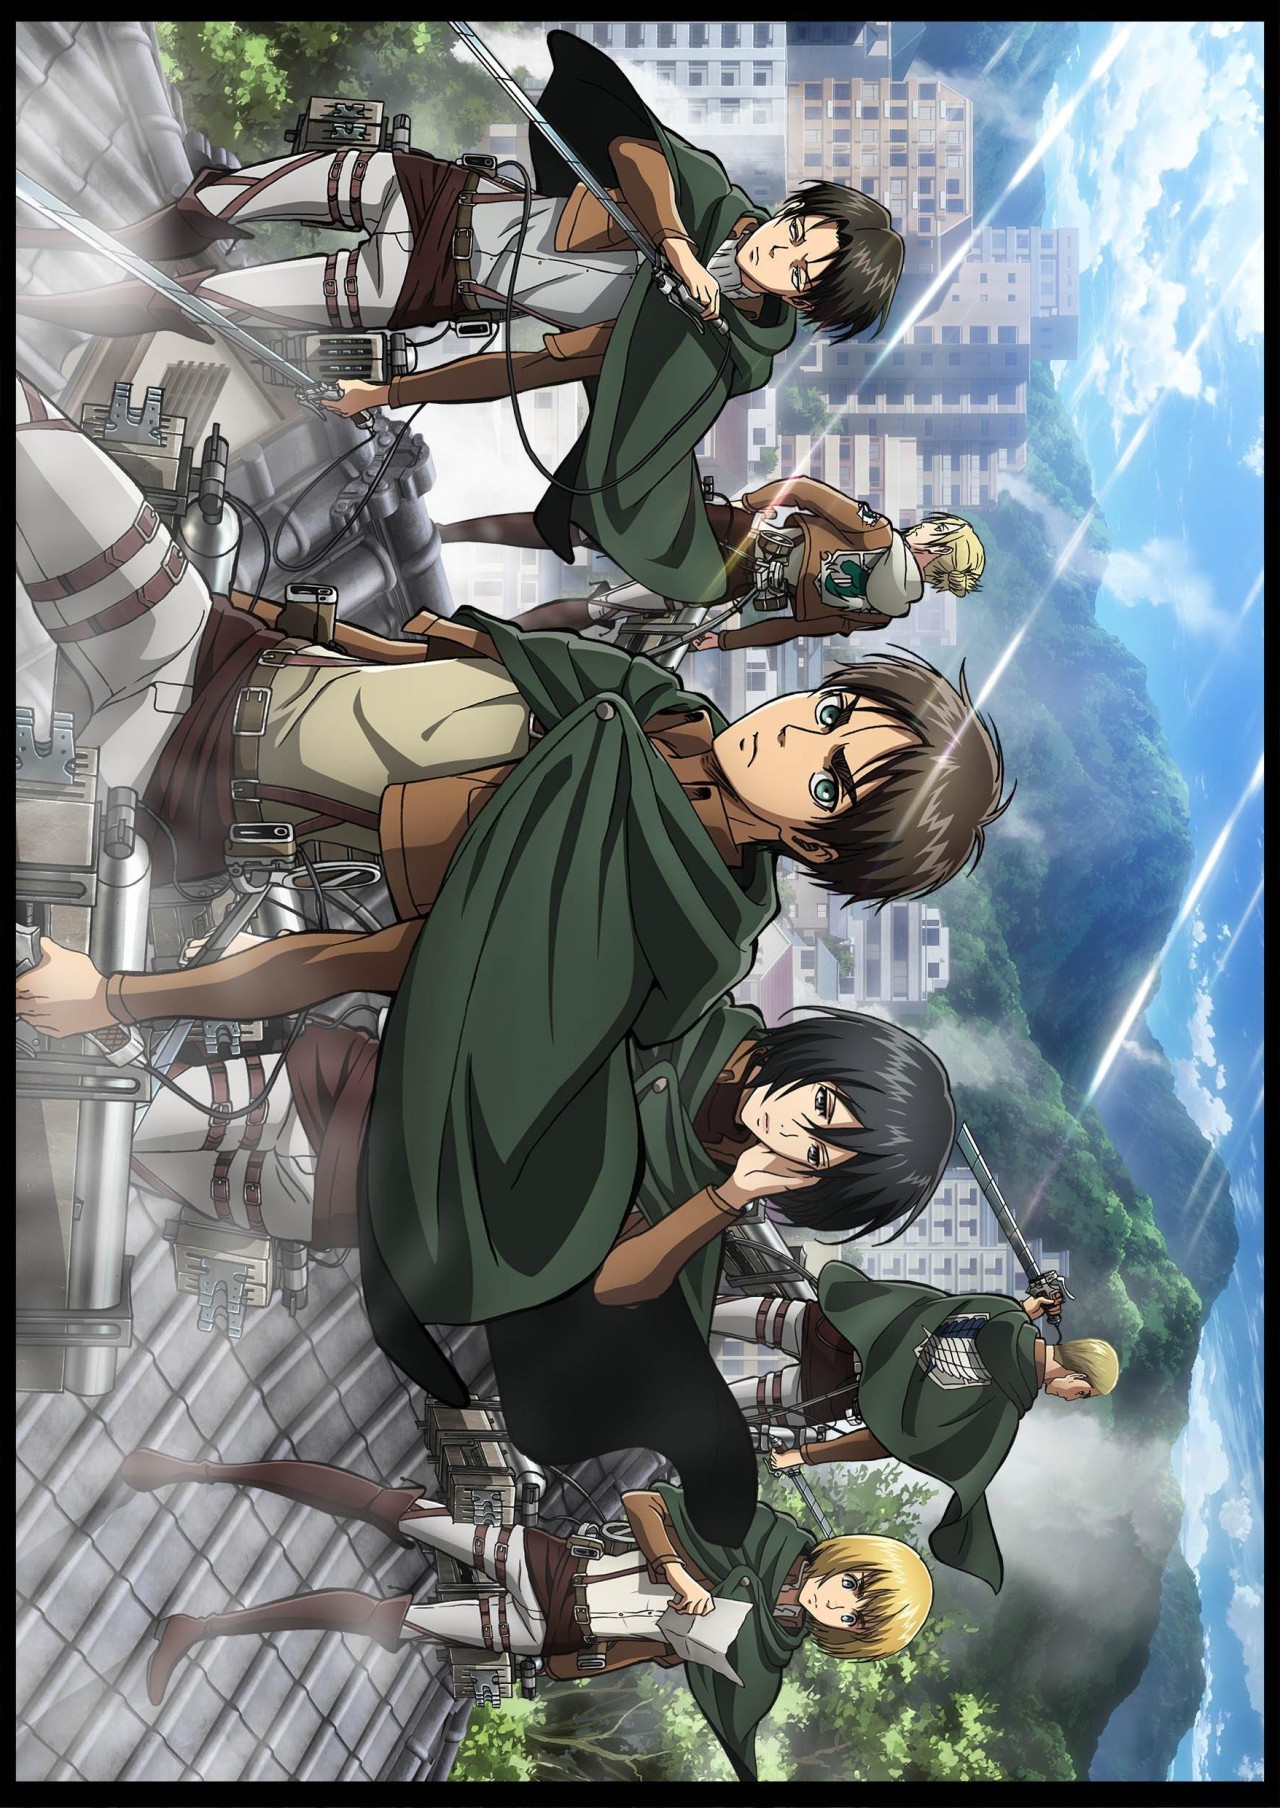 New official image featuring Eren, Mikasa, Armin, Levi, Annie, and Erwin will be